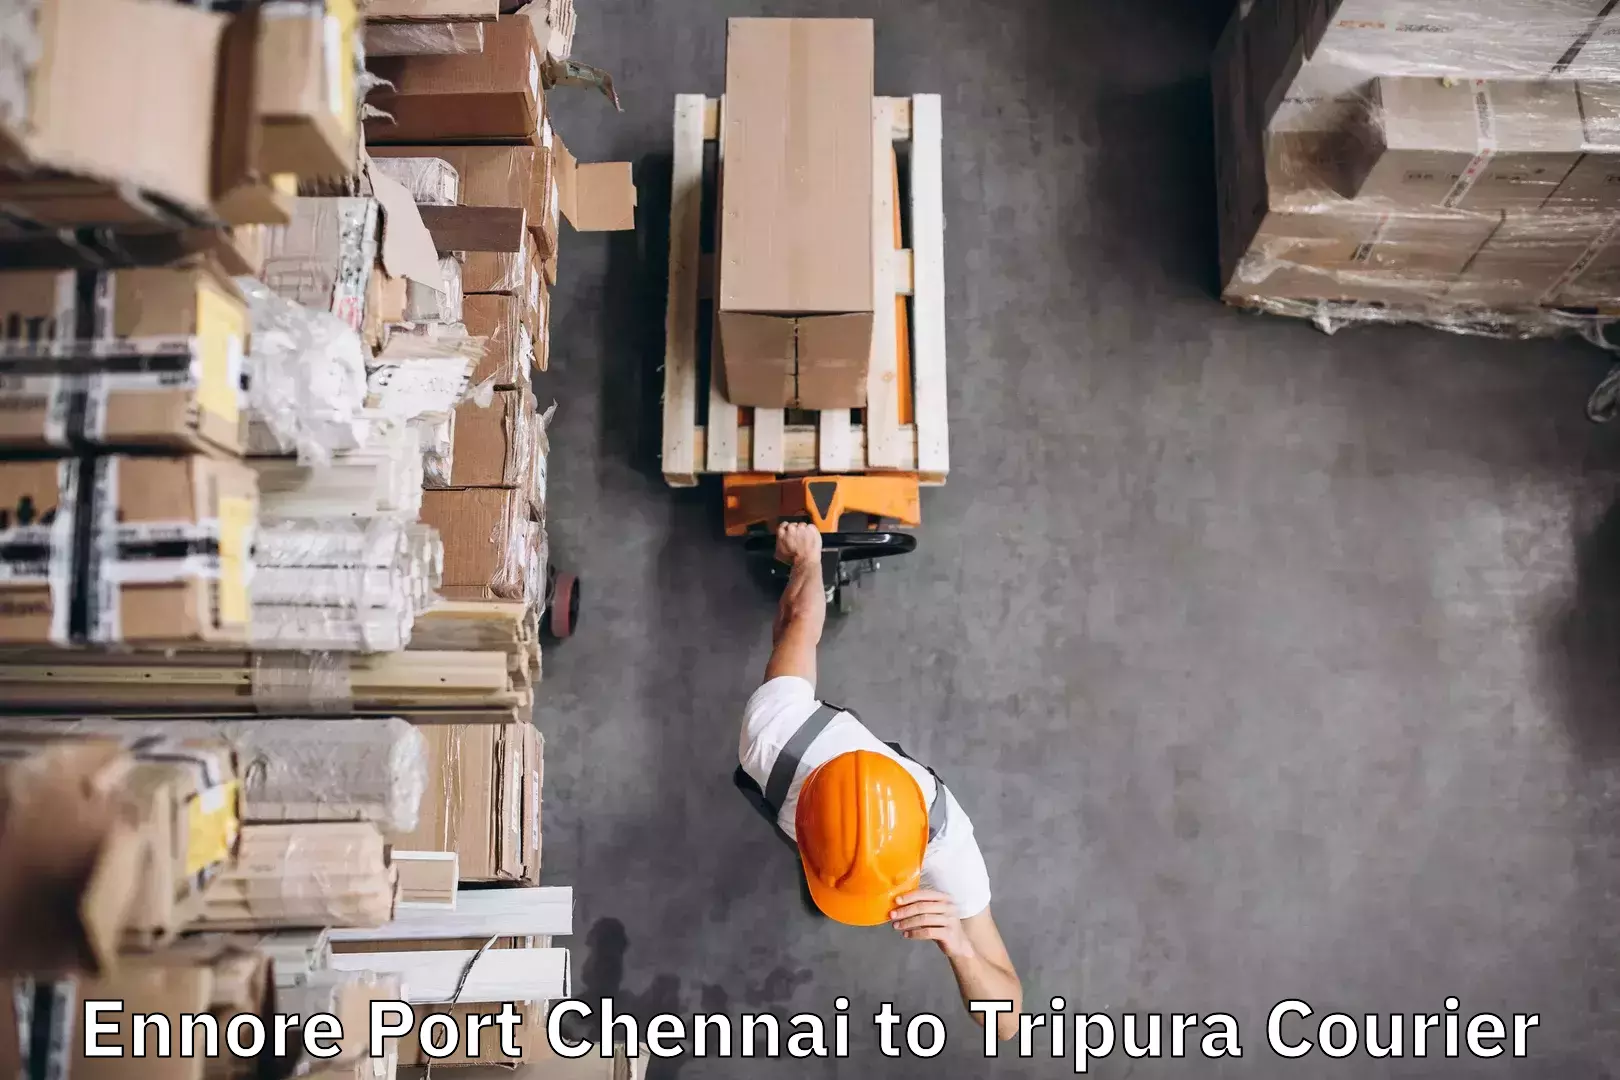 Instant baggage transport quote Ennore Port Chennai to Kamalpur